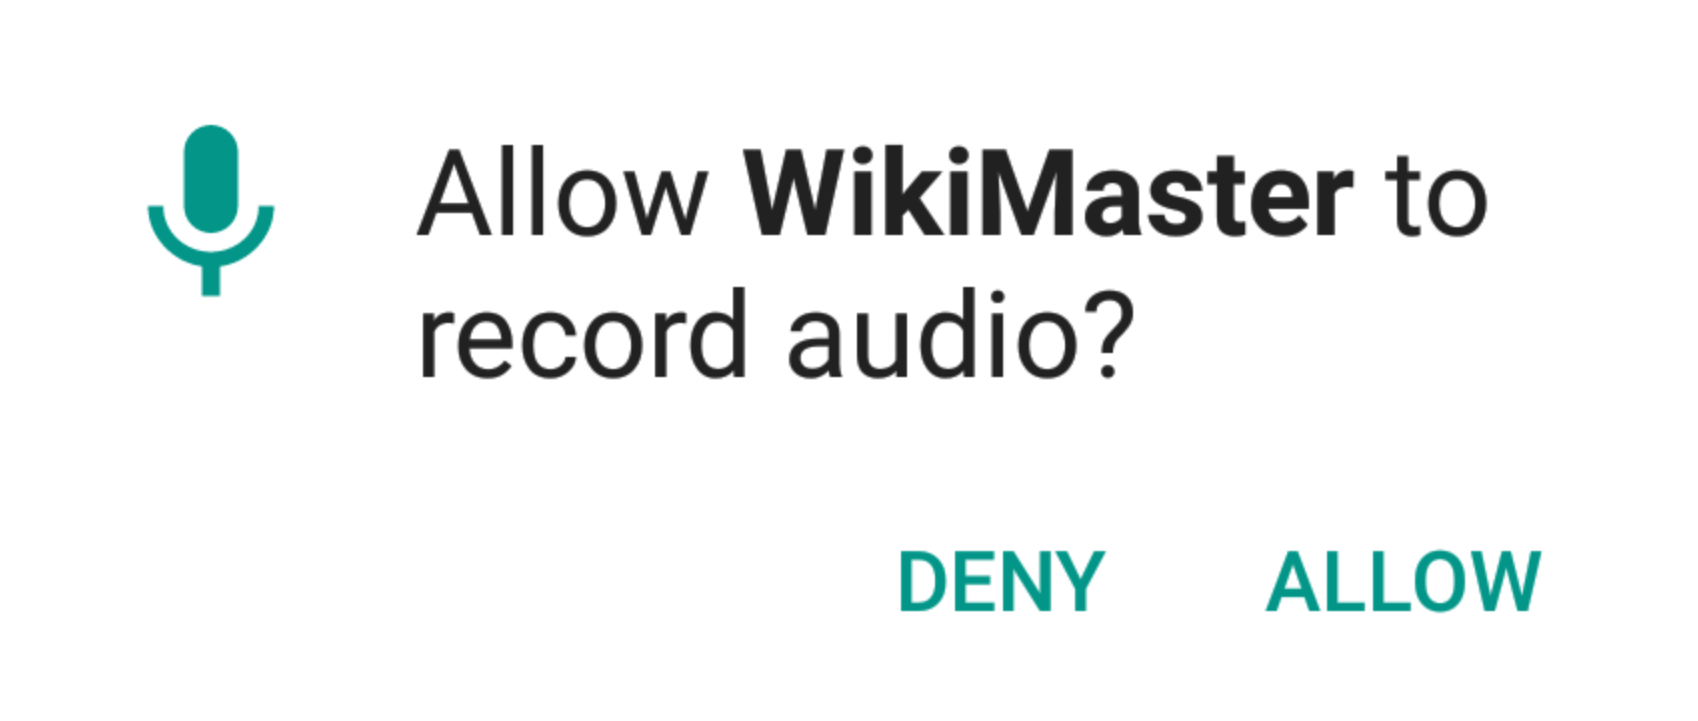 Command WikiMaster Quizzes with your voice